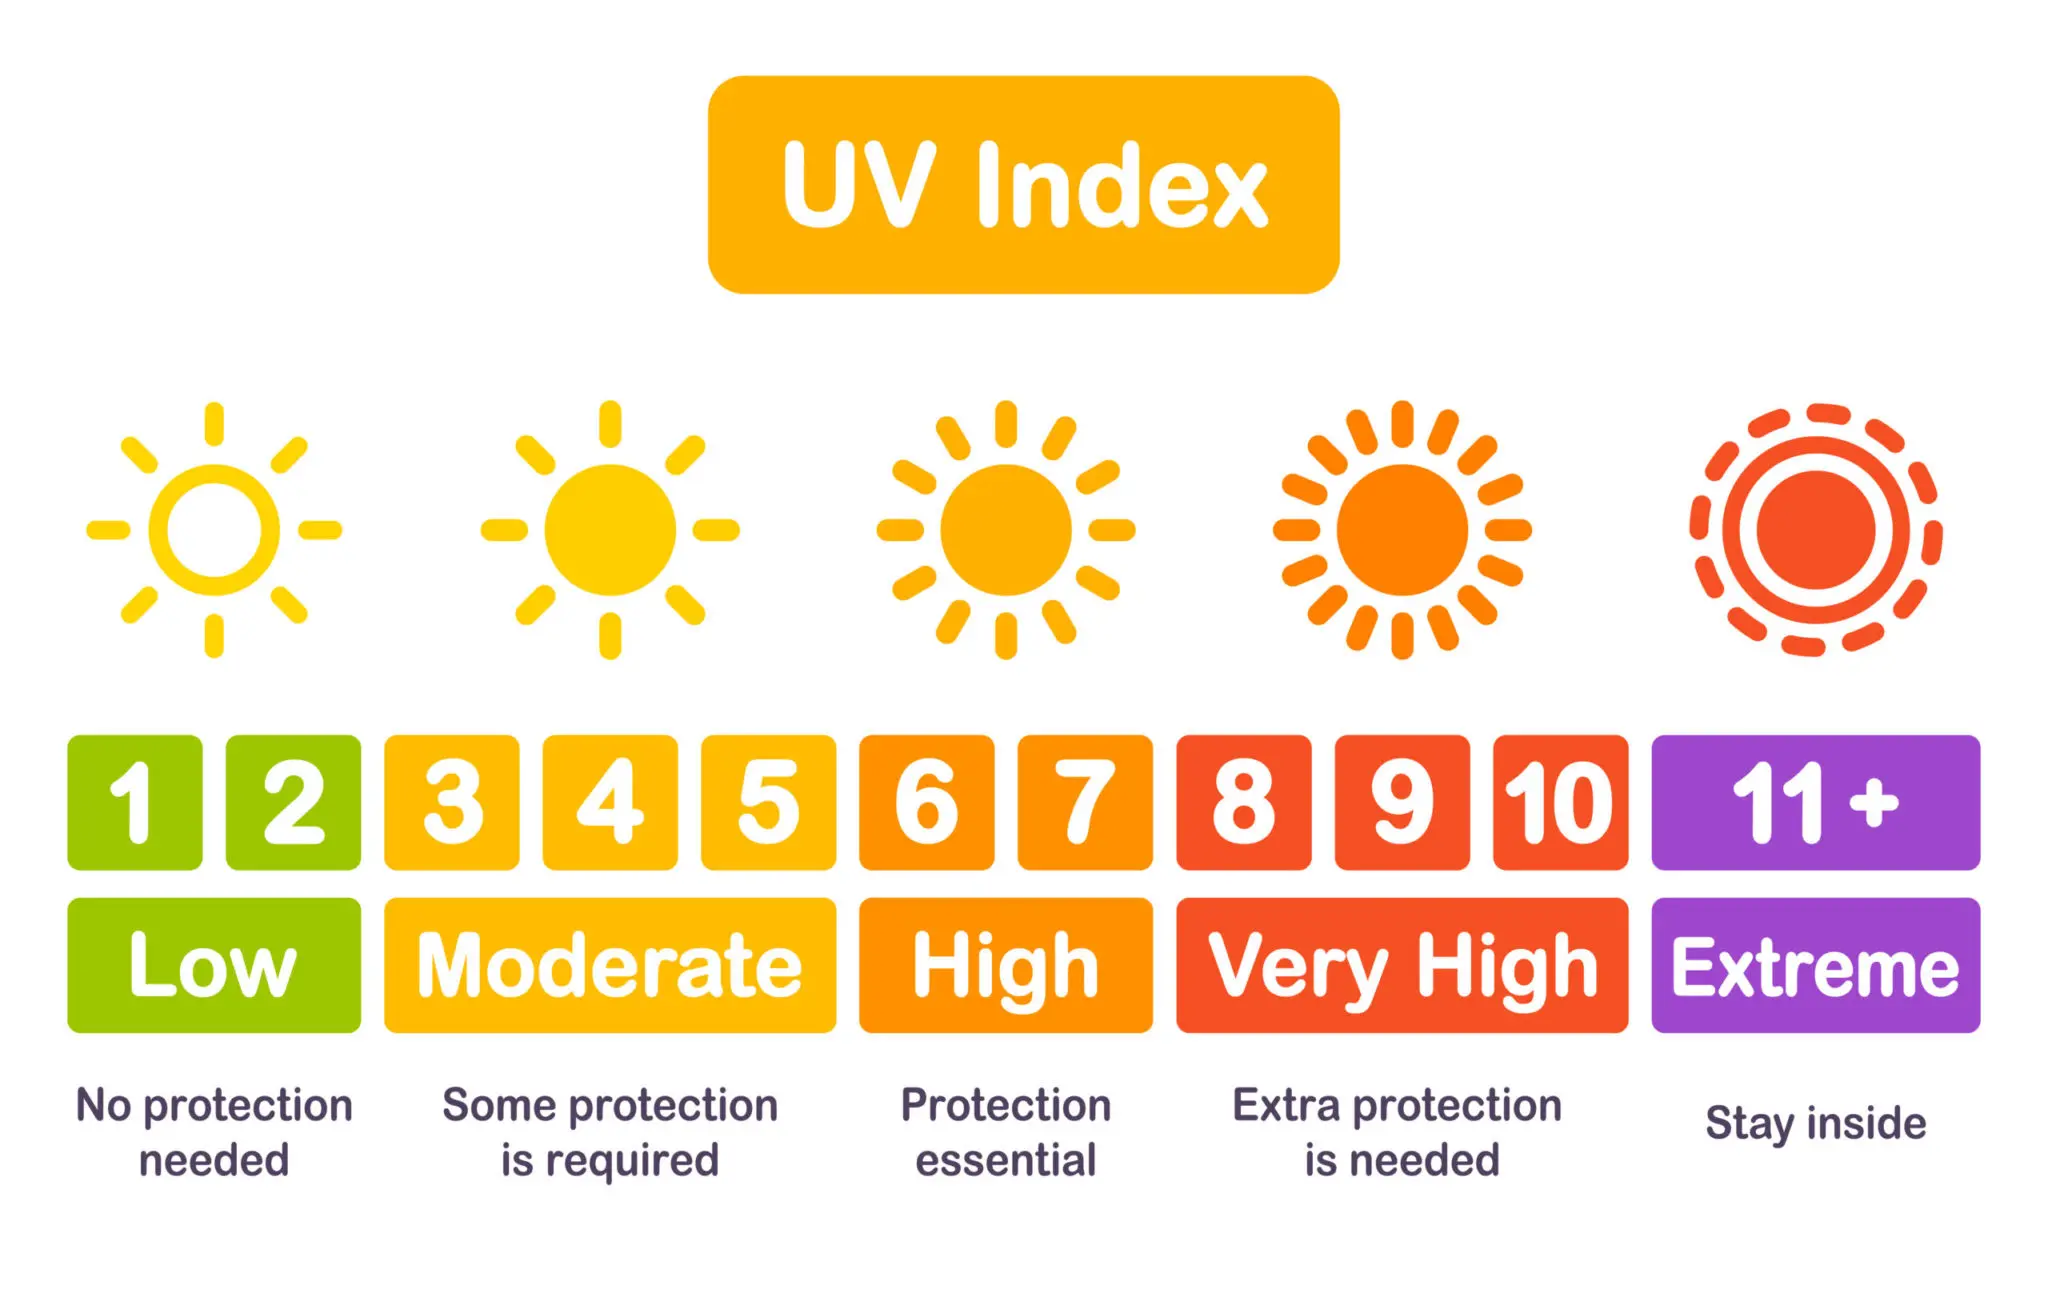 Whats a Good Uv to Tan?